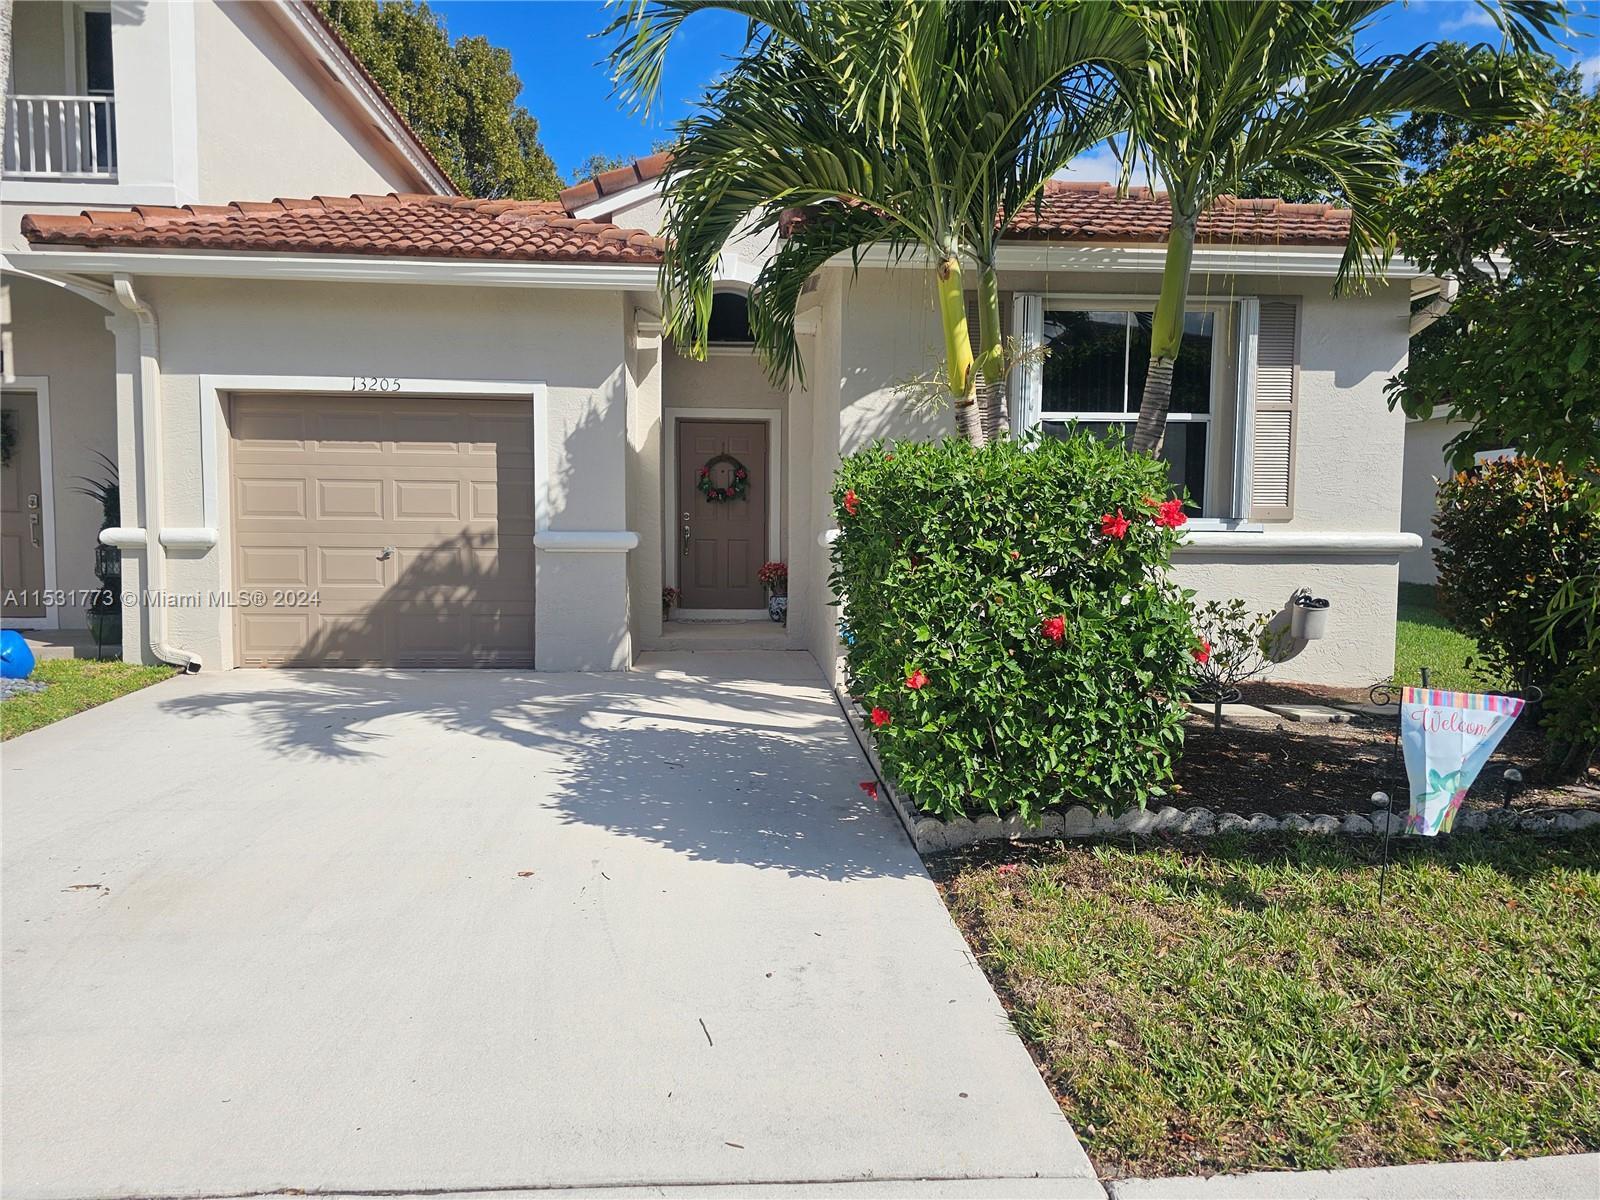 Photo of 13205 NW 9th Ct in Pembroke Pines, FL